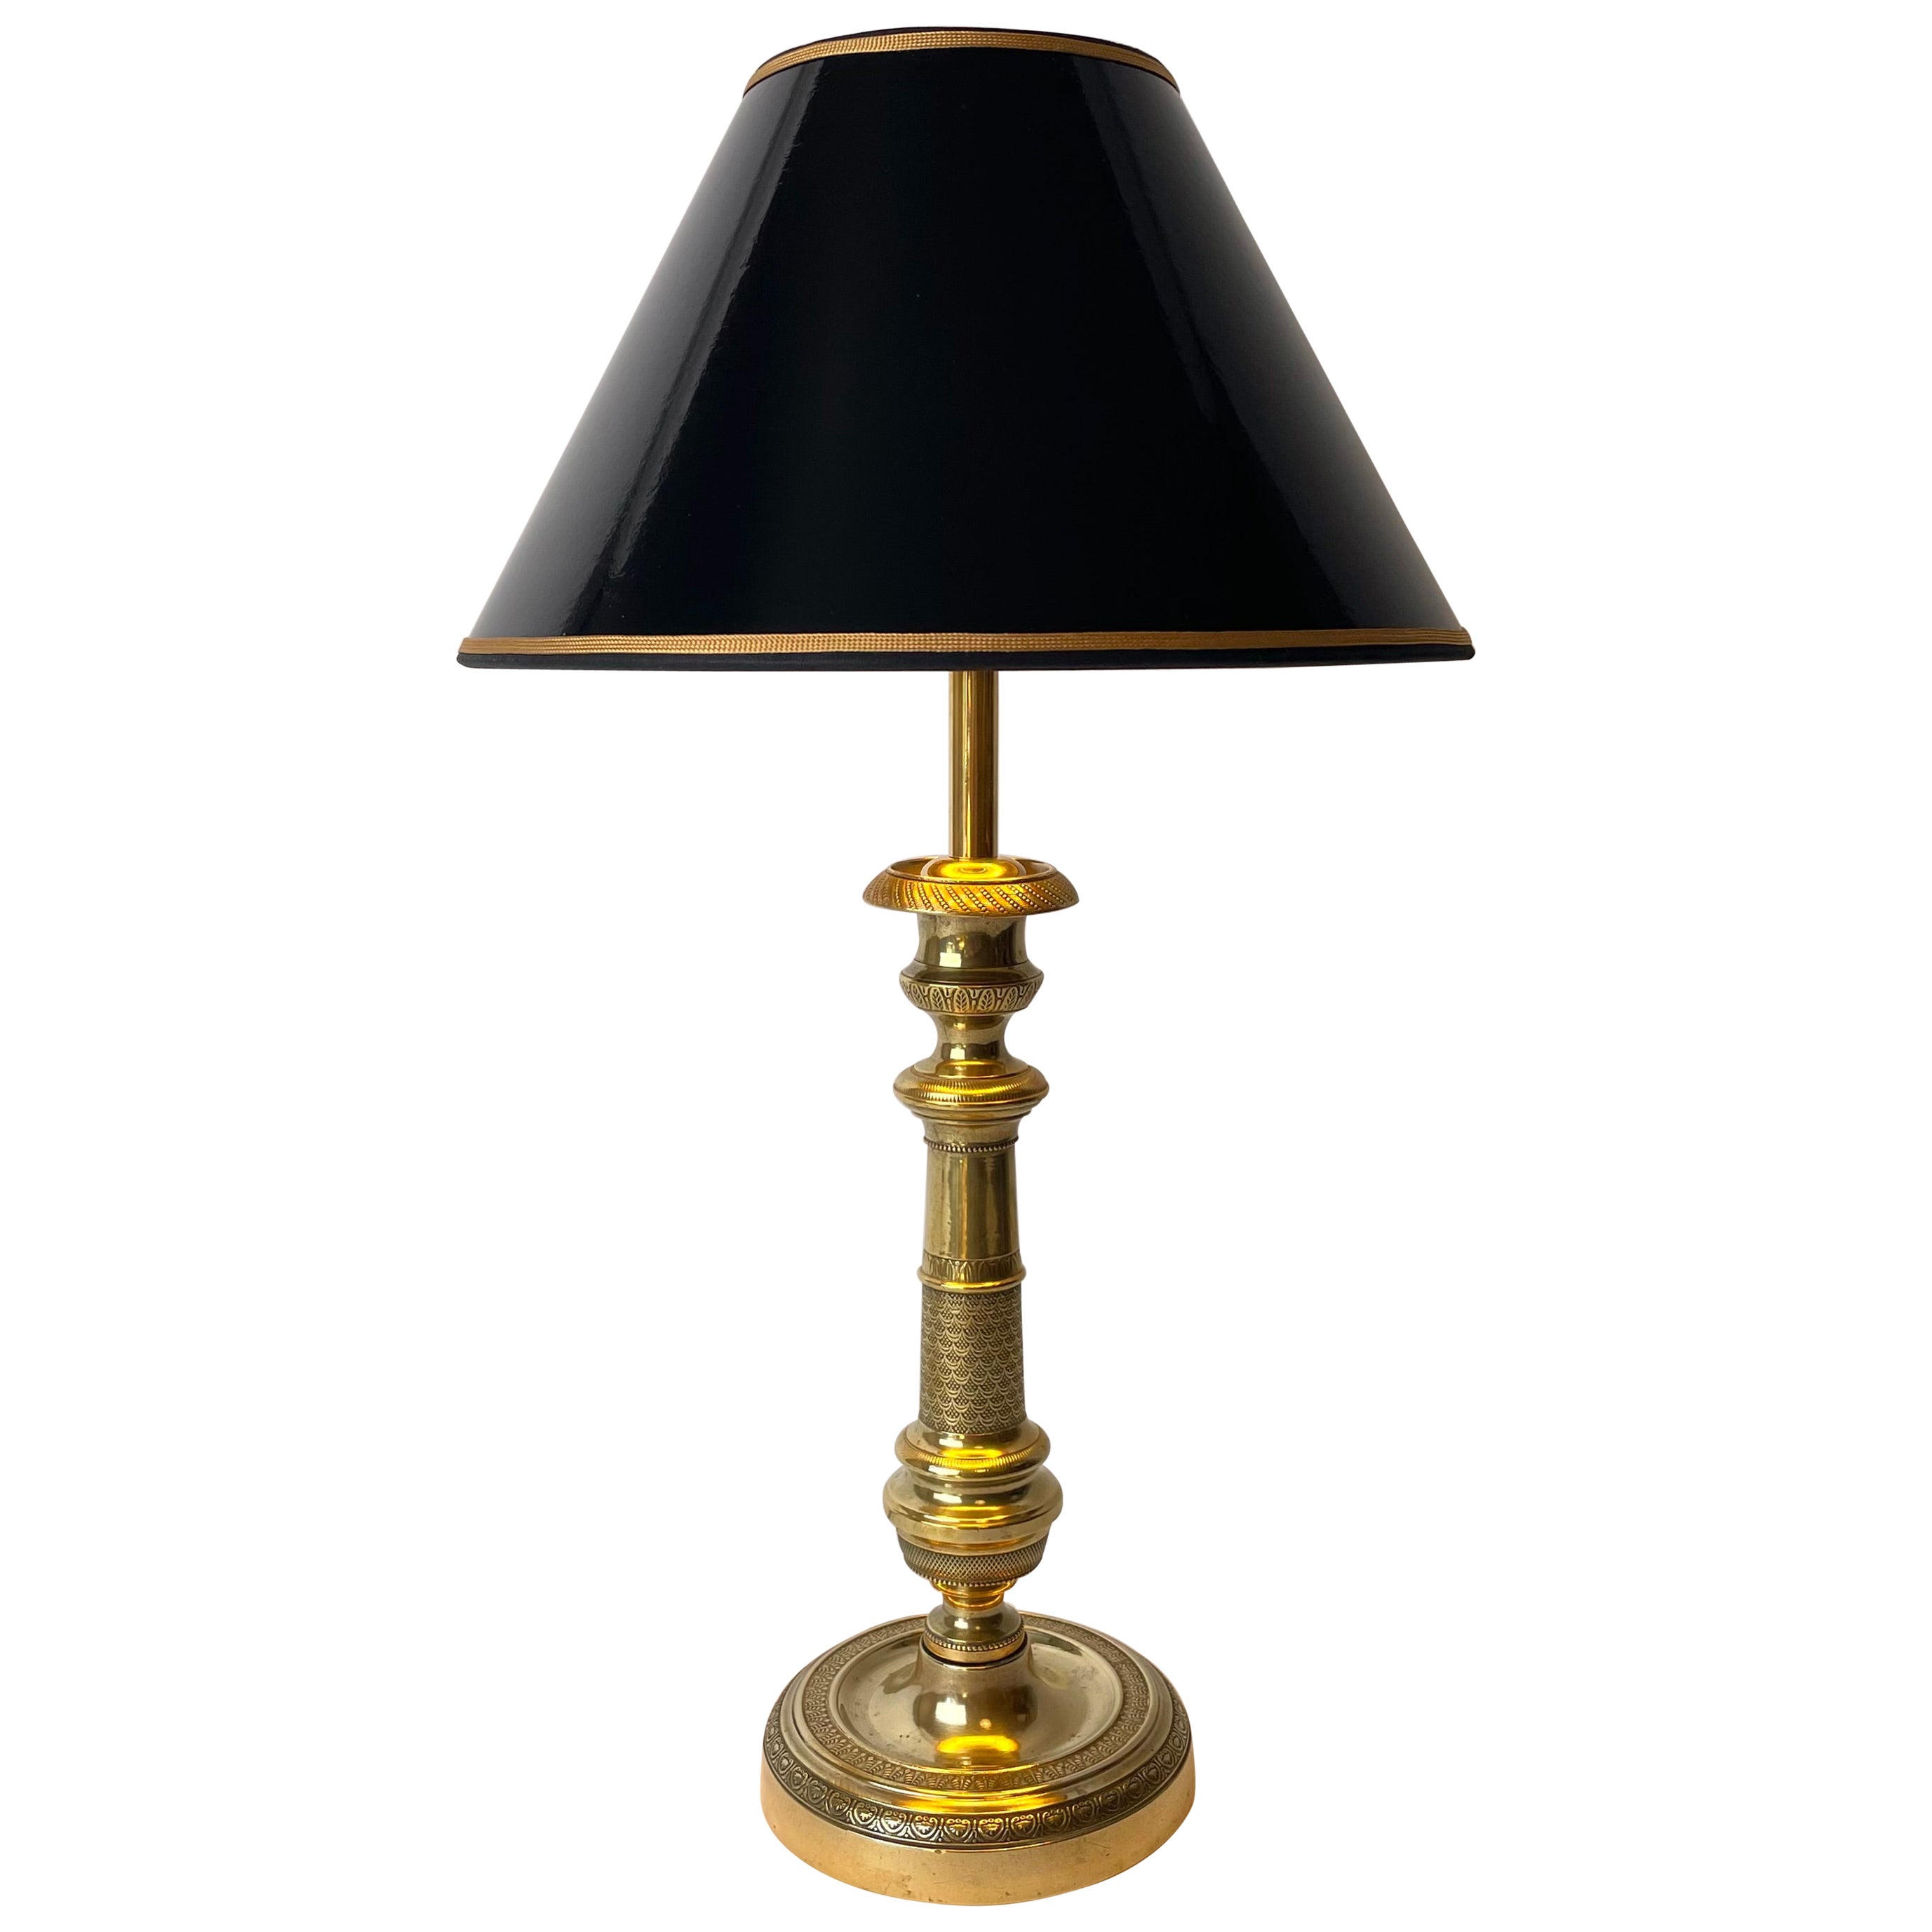 Elegant Table Lamp in Brass, 1820s French Empire, Originally Candlestick